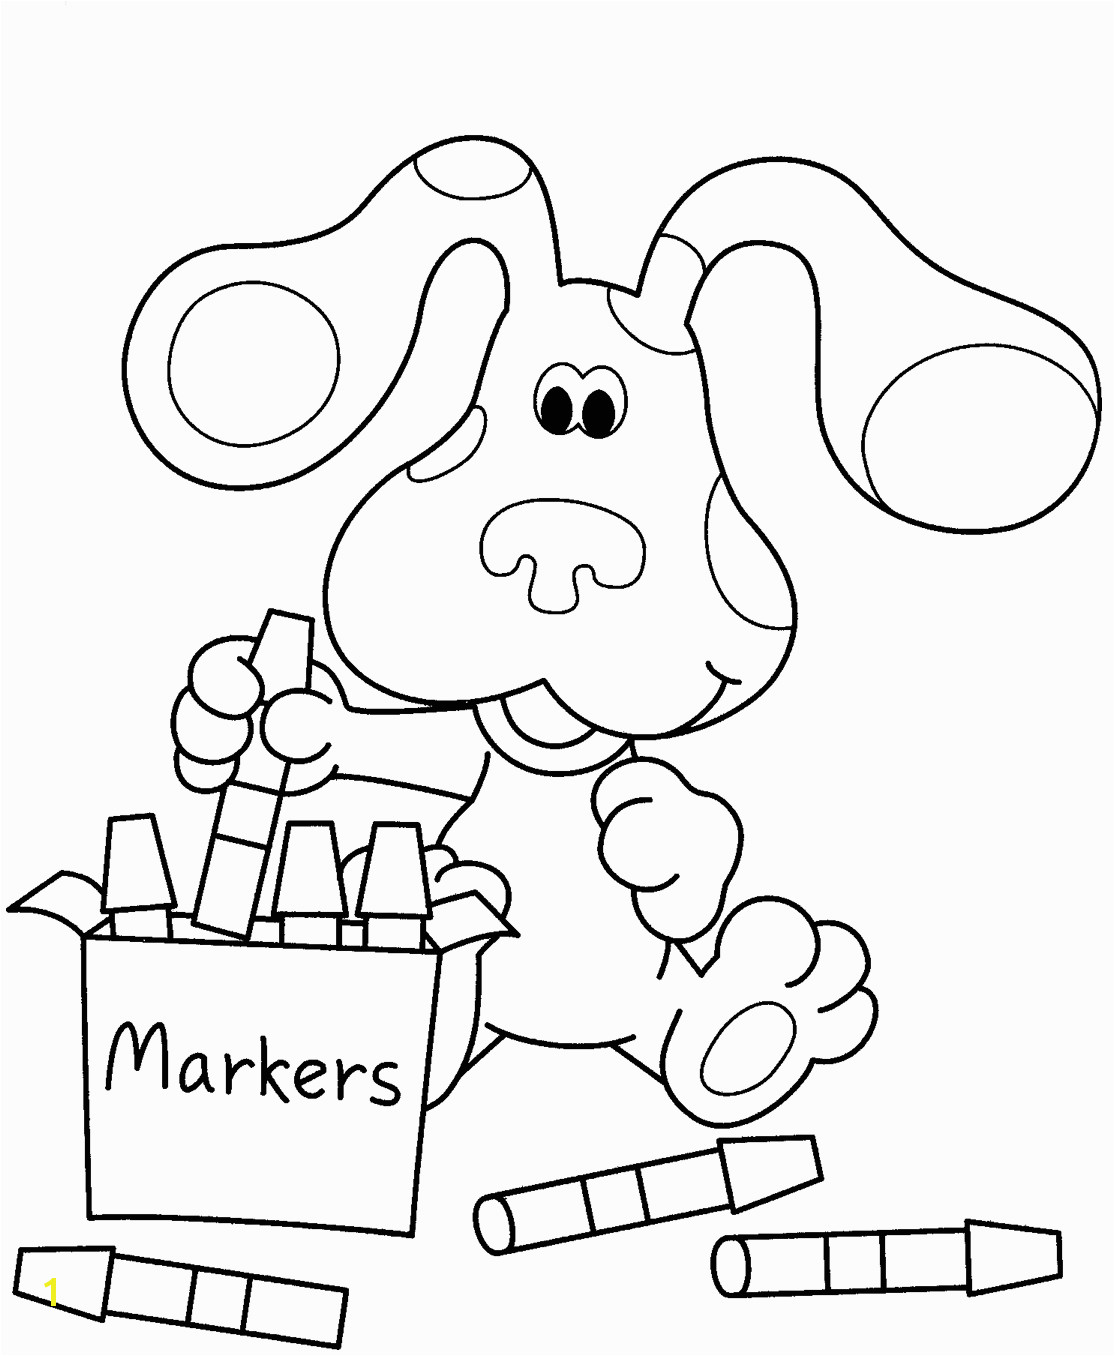 Blues Clues Christmas Coloring Pages Fresh Nick Jr Christmas Coloring Pages